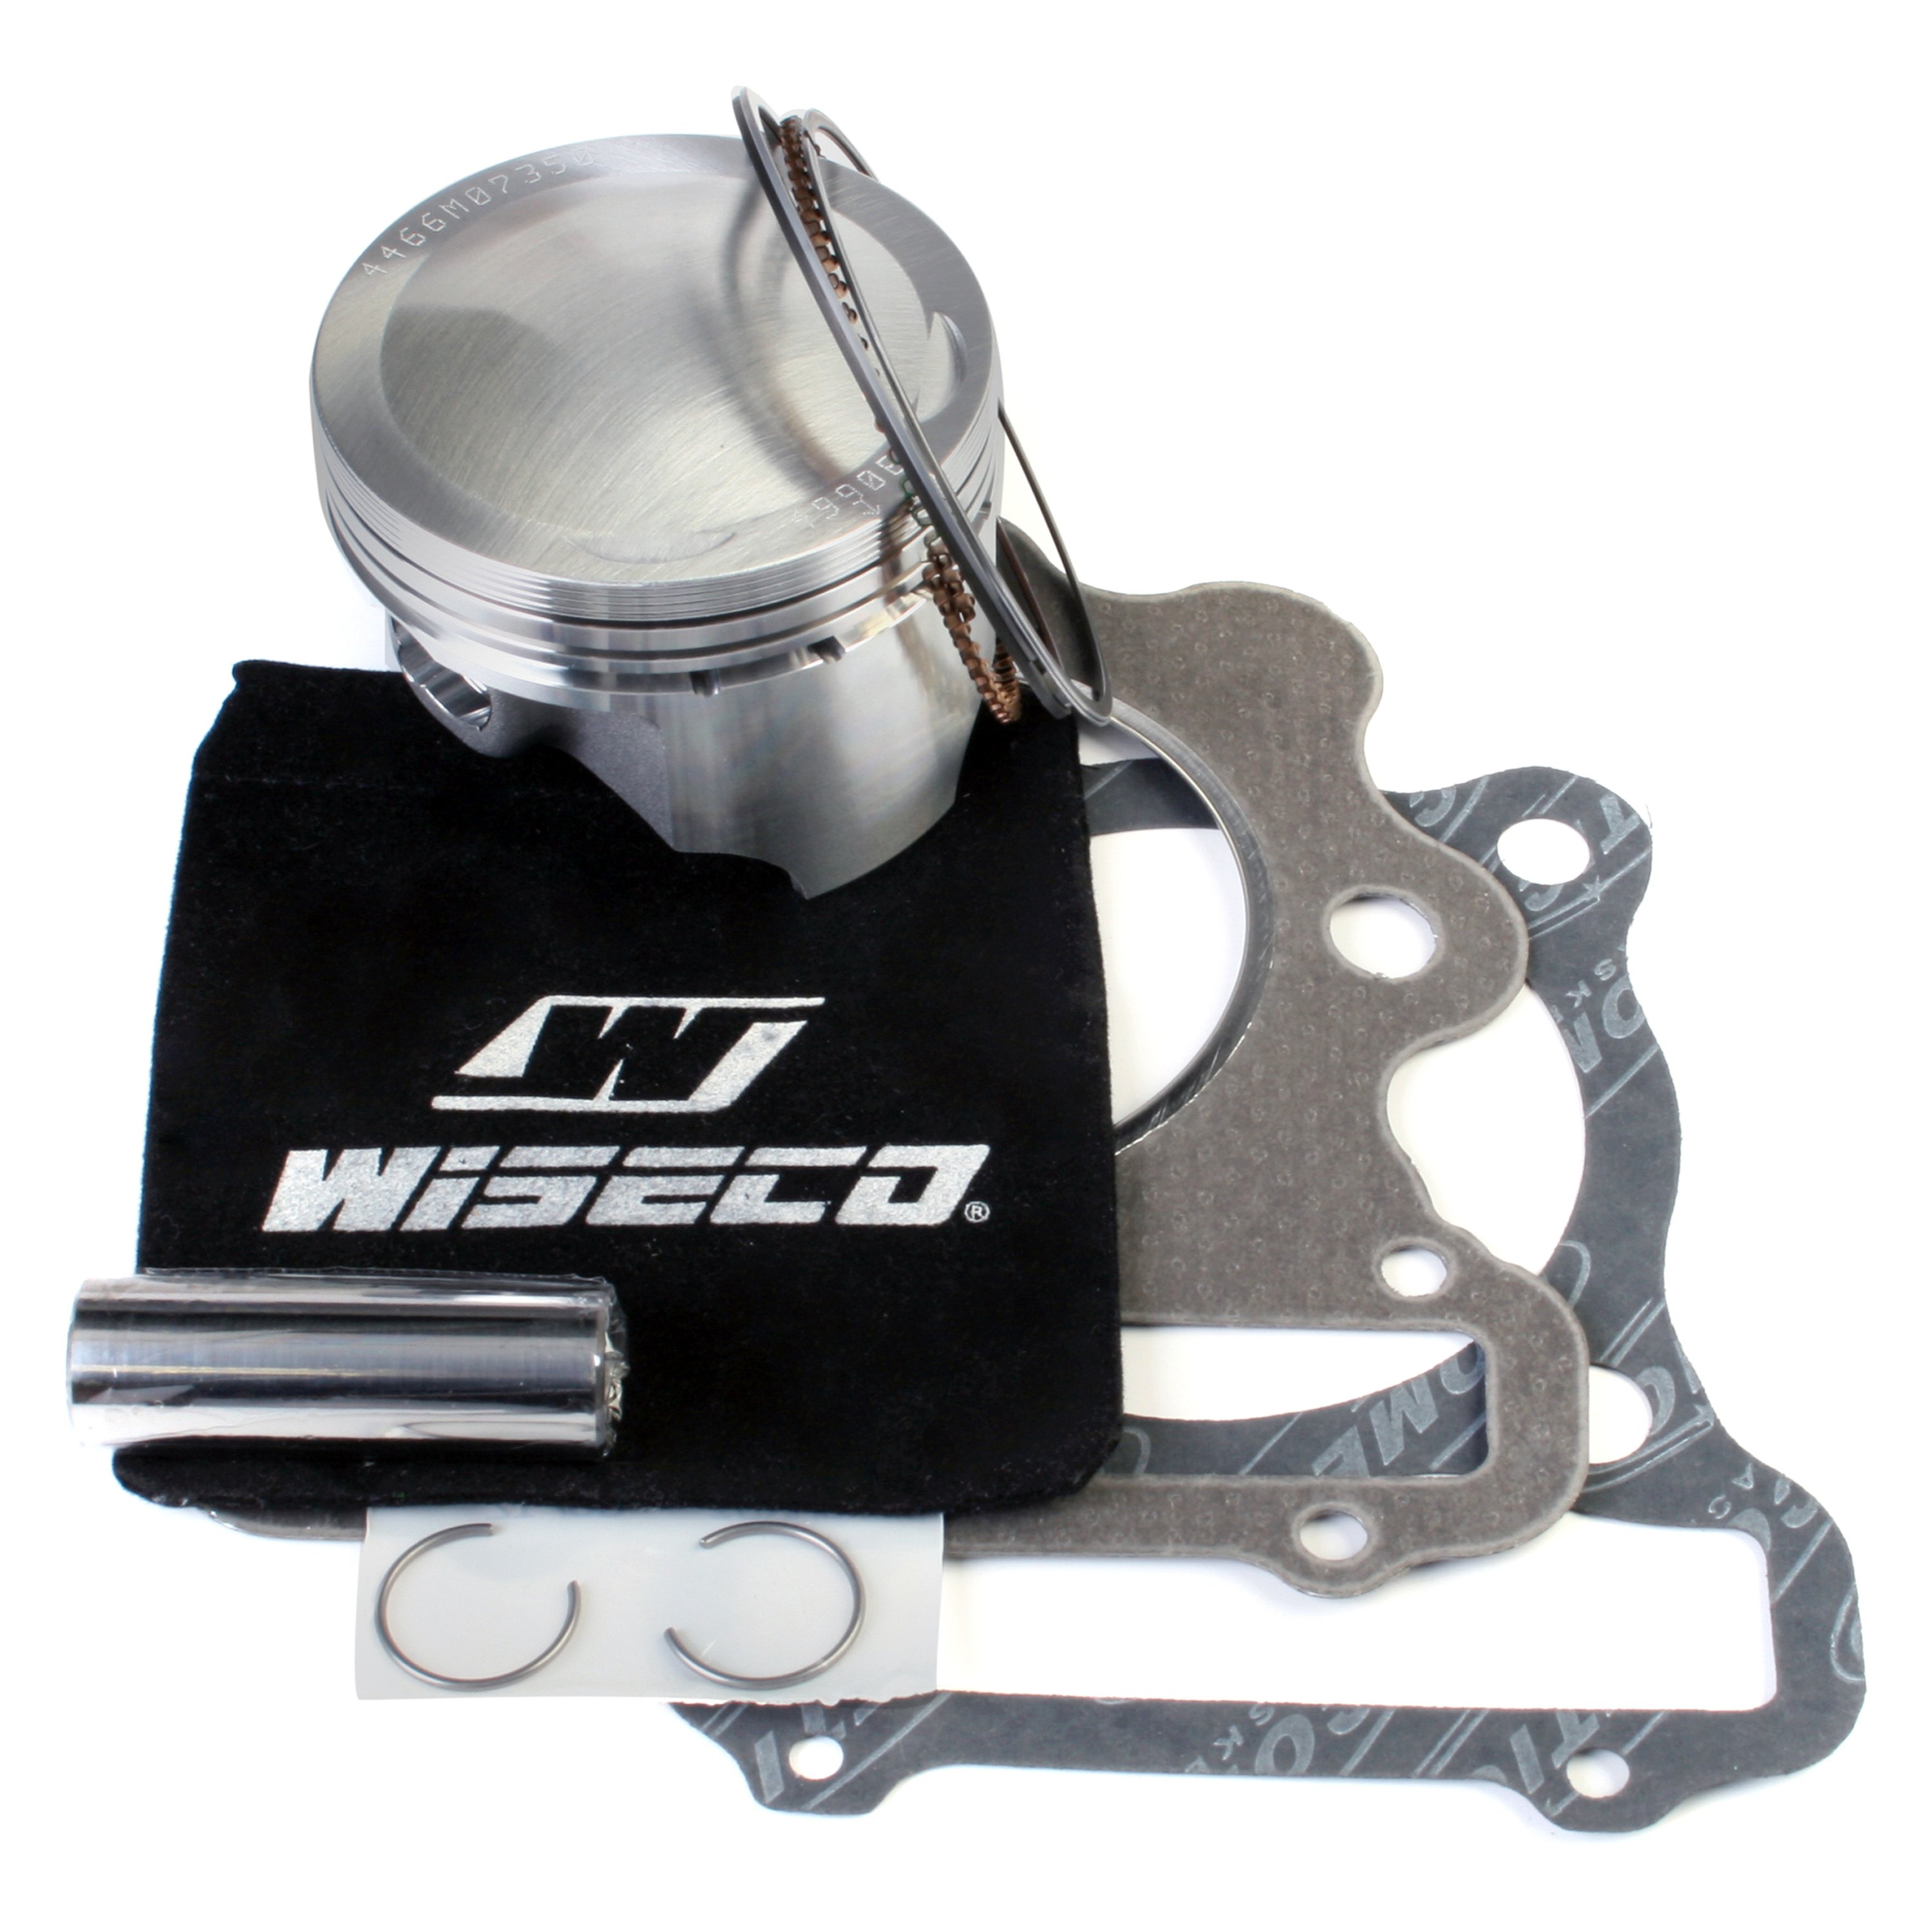 Piston Kit 4466M07350 10.5:1 Compression Wiseco 0.50mm Oversize to 73.50mm 